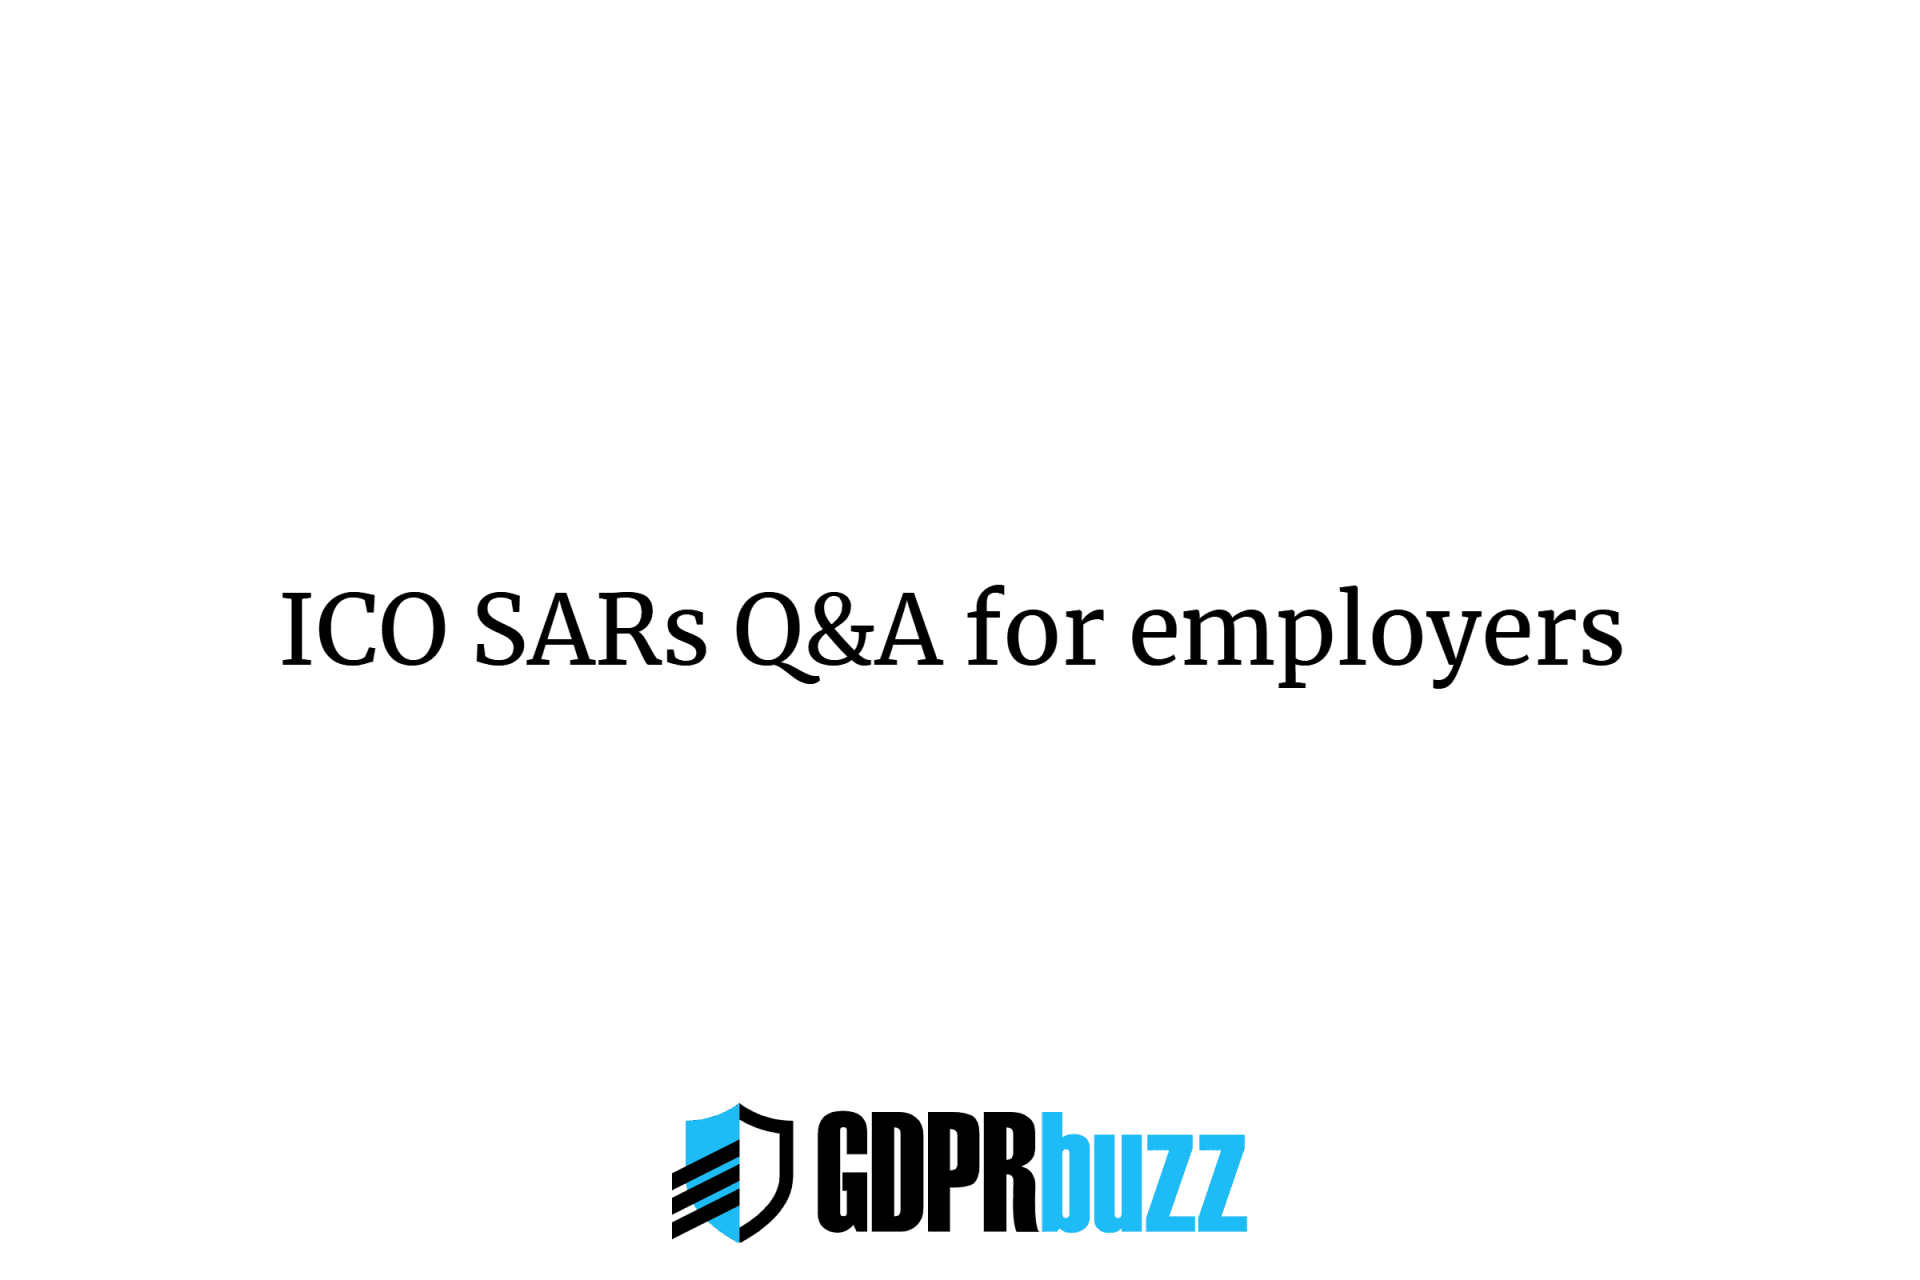 Ico sars q&a for employers